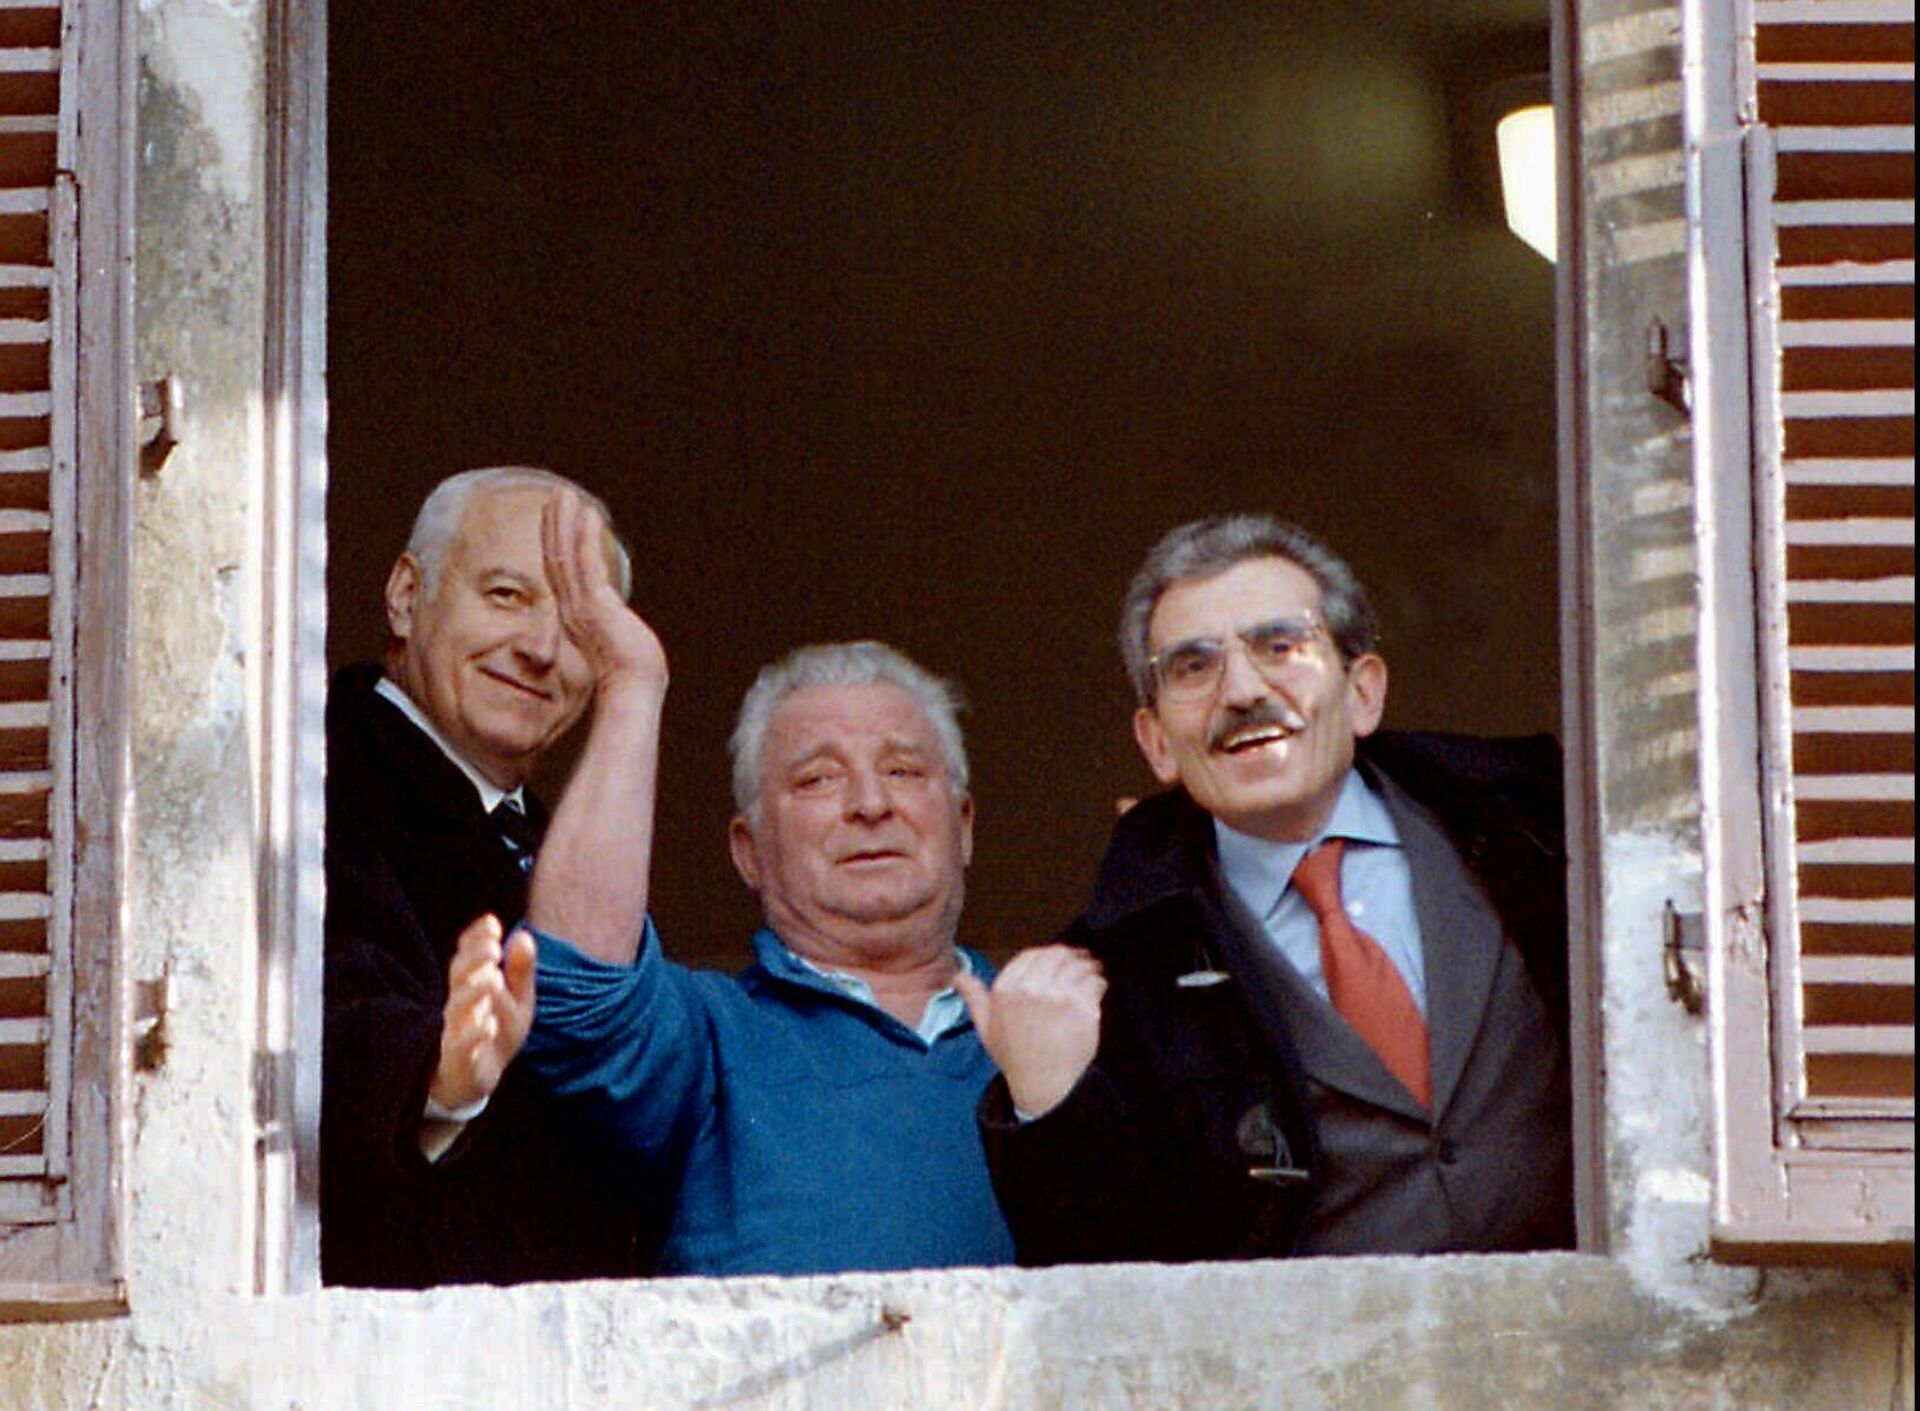 Farmhand Pietro Pacciani, dubbed ''The Monster of Florence'', center, flanked by his defense lawyers Rosario Bevacqua, left, and Pietro Fiorentini, right, waves from a window of a religious institute in Florence Wednesday Feb. 14, 1996. Pacciani was set free on Feb. 13, 1996, after an appeals court overturned his conviction. This 71-year-old grandfather, convicted for seven double murders in what was Italy's worst killing spree, left prison after being cleared of all fault. - Sputnik International, 1920, 26.03.2022